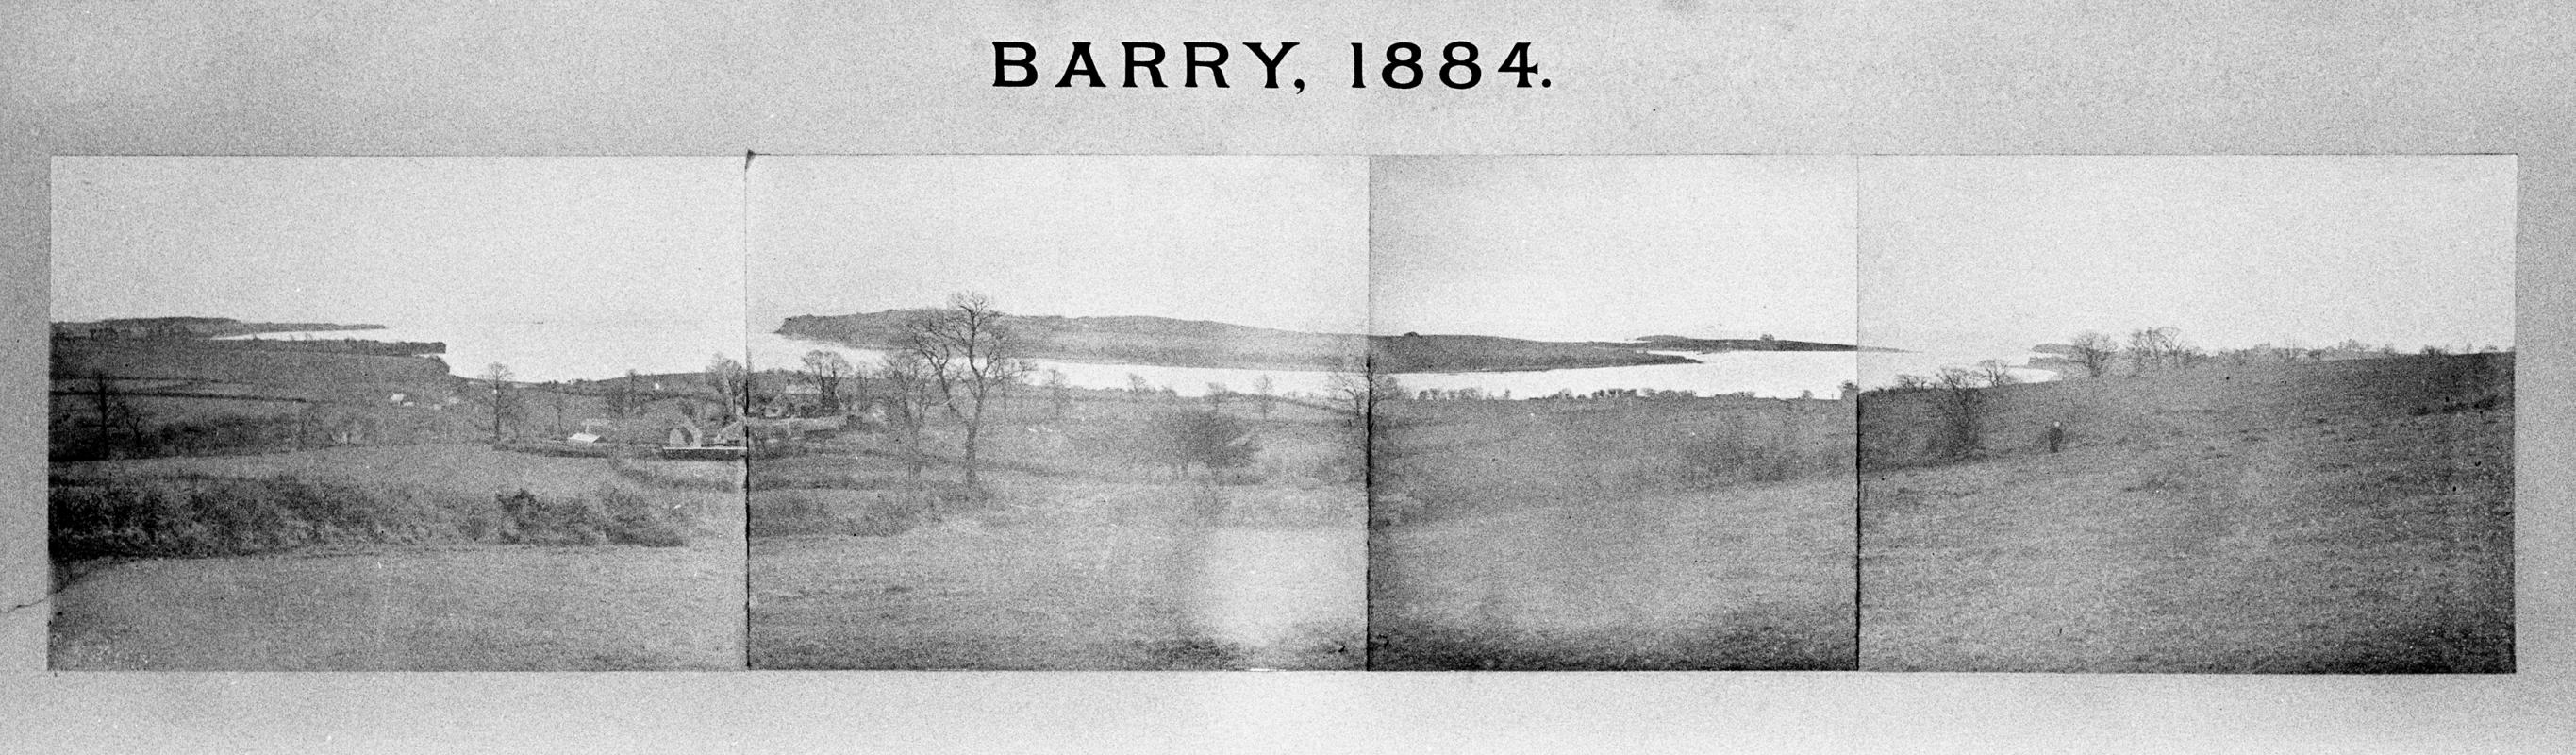 Panoramic view of Barry